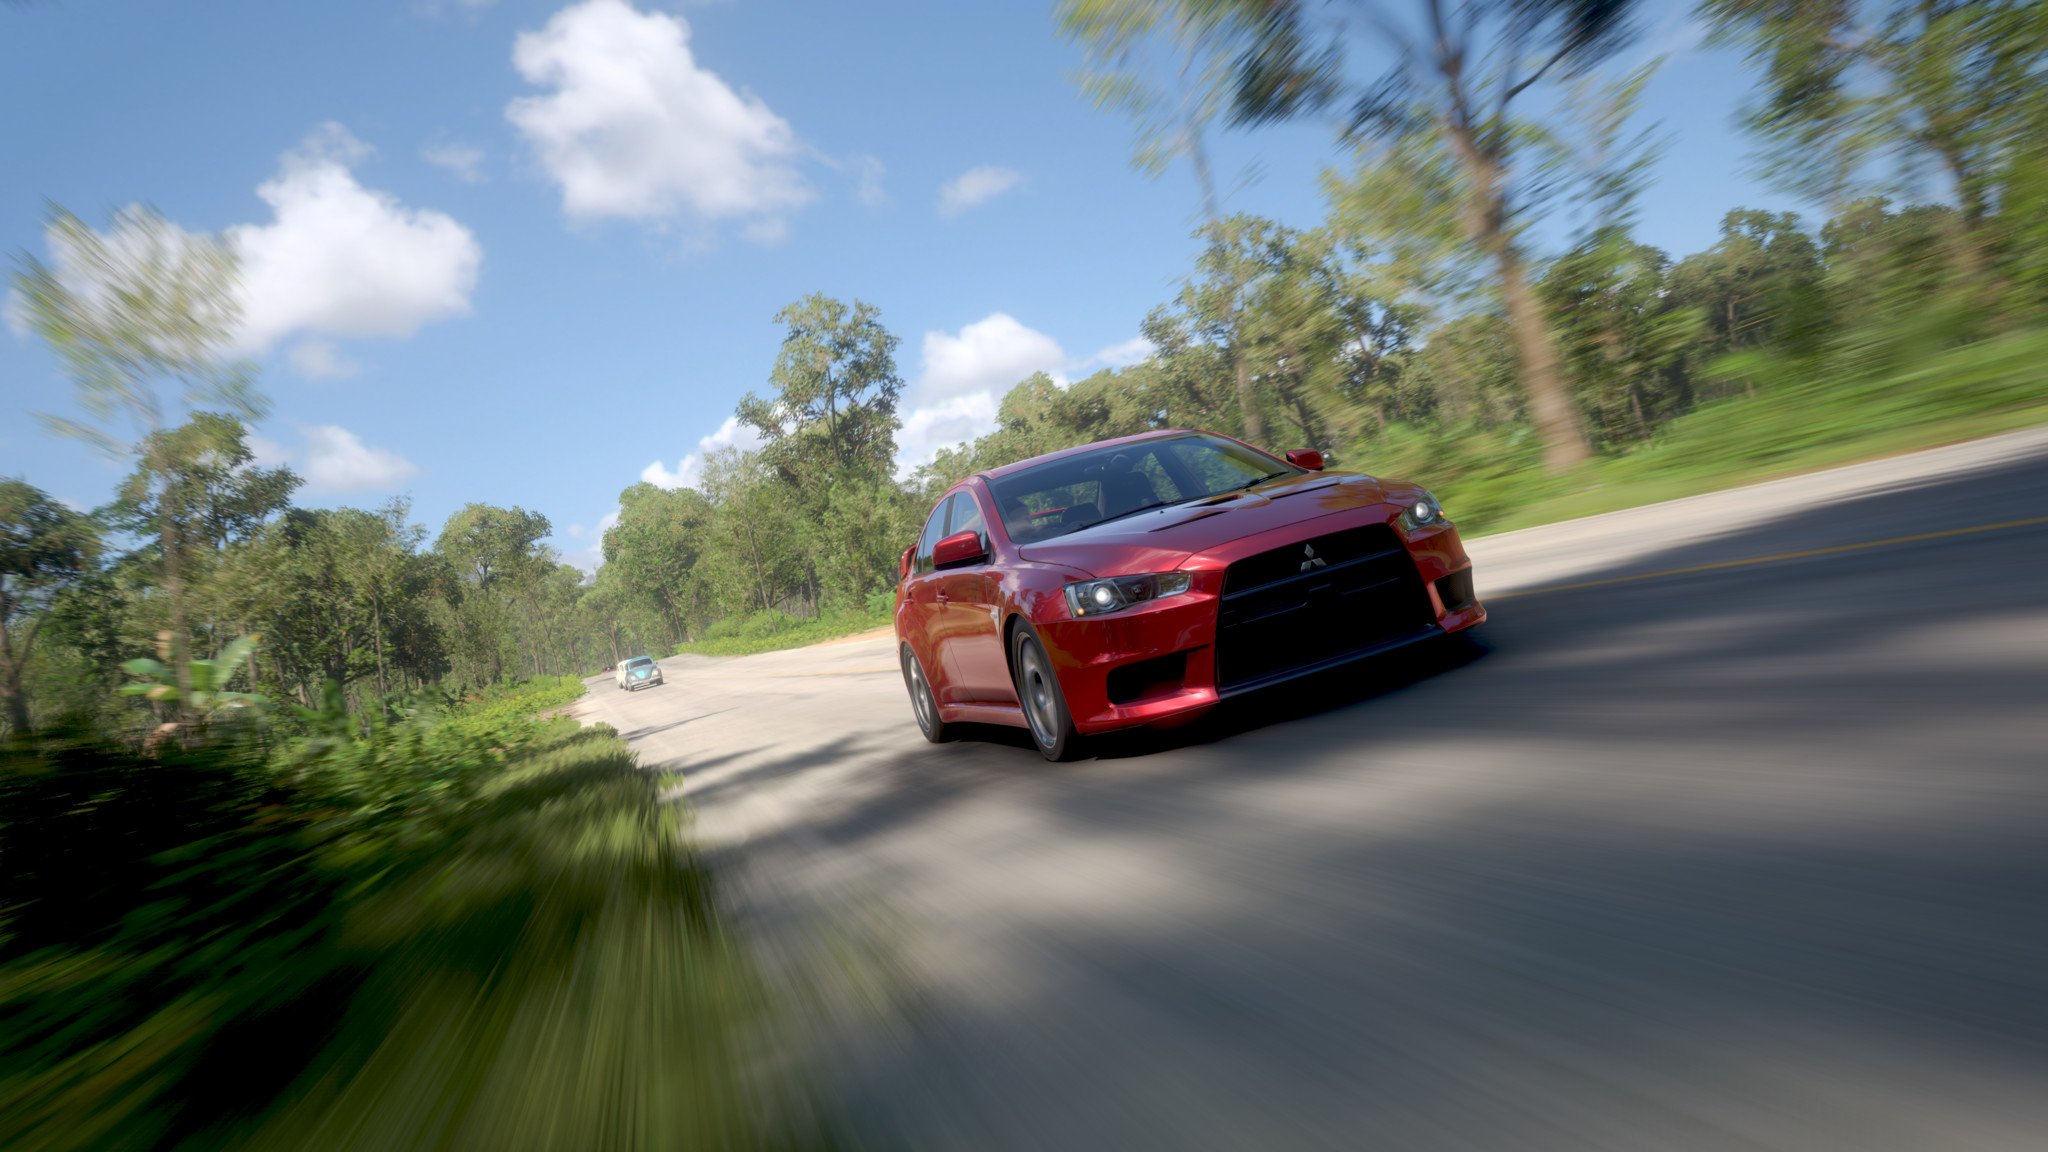 Forza Horizon 5 game review: A gorgeous drive to familiar heights